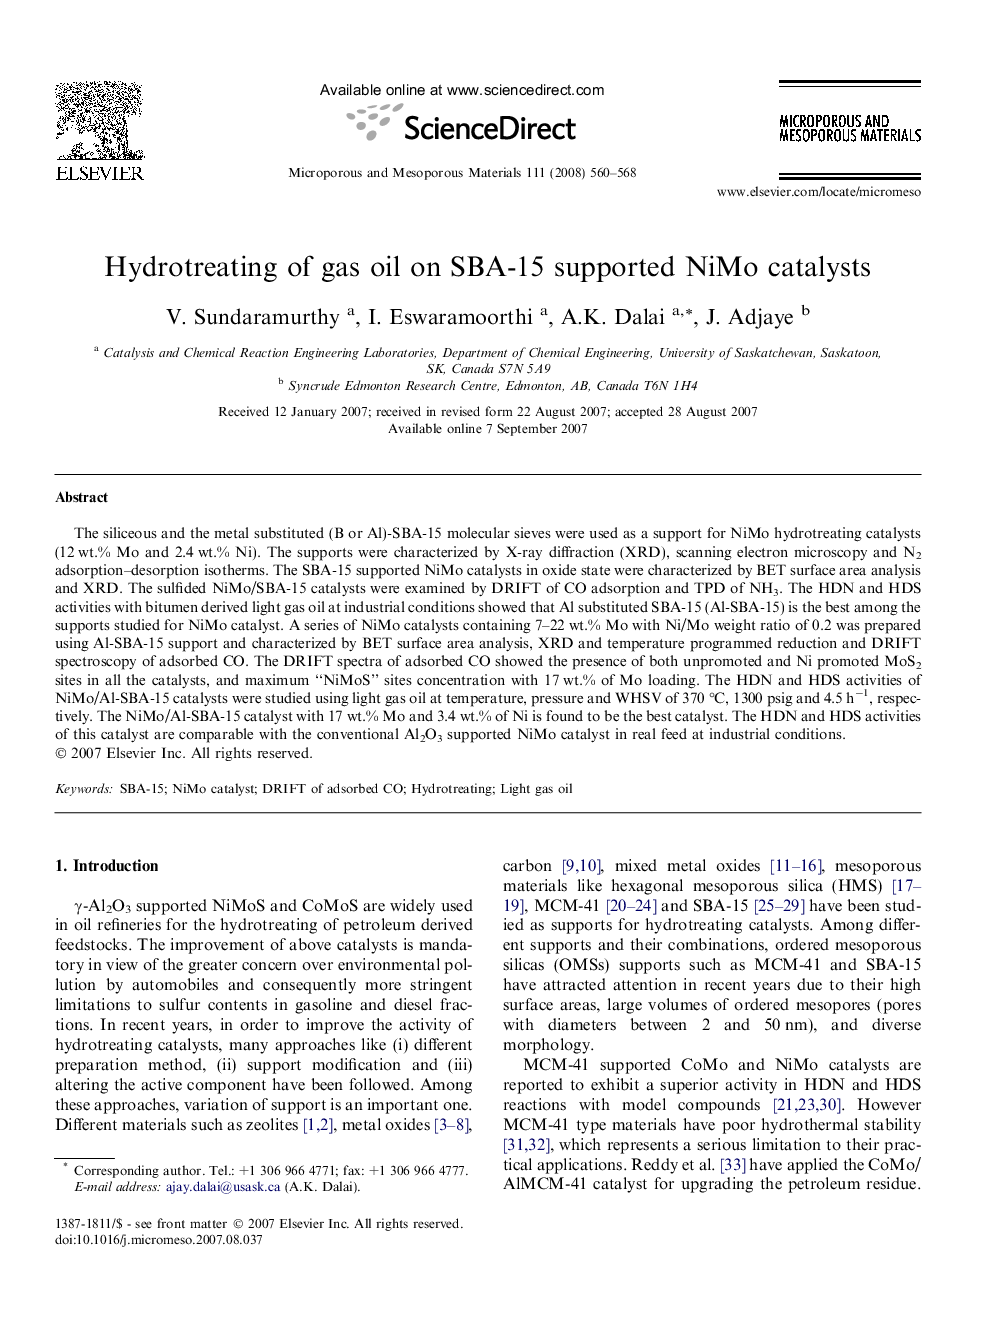 Hydrotreating of gas oil on SBA-15 supported NiMo catalysts